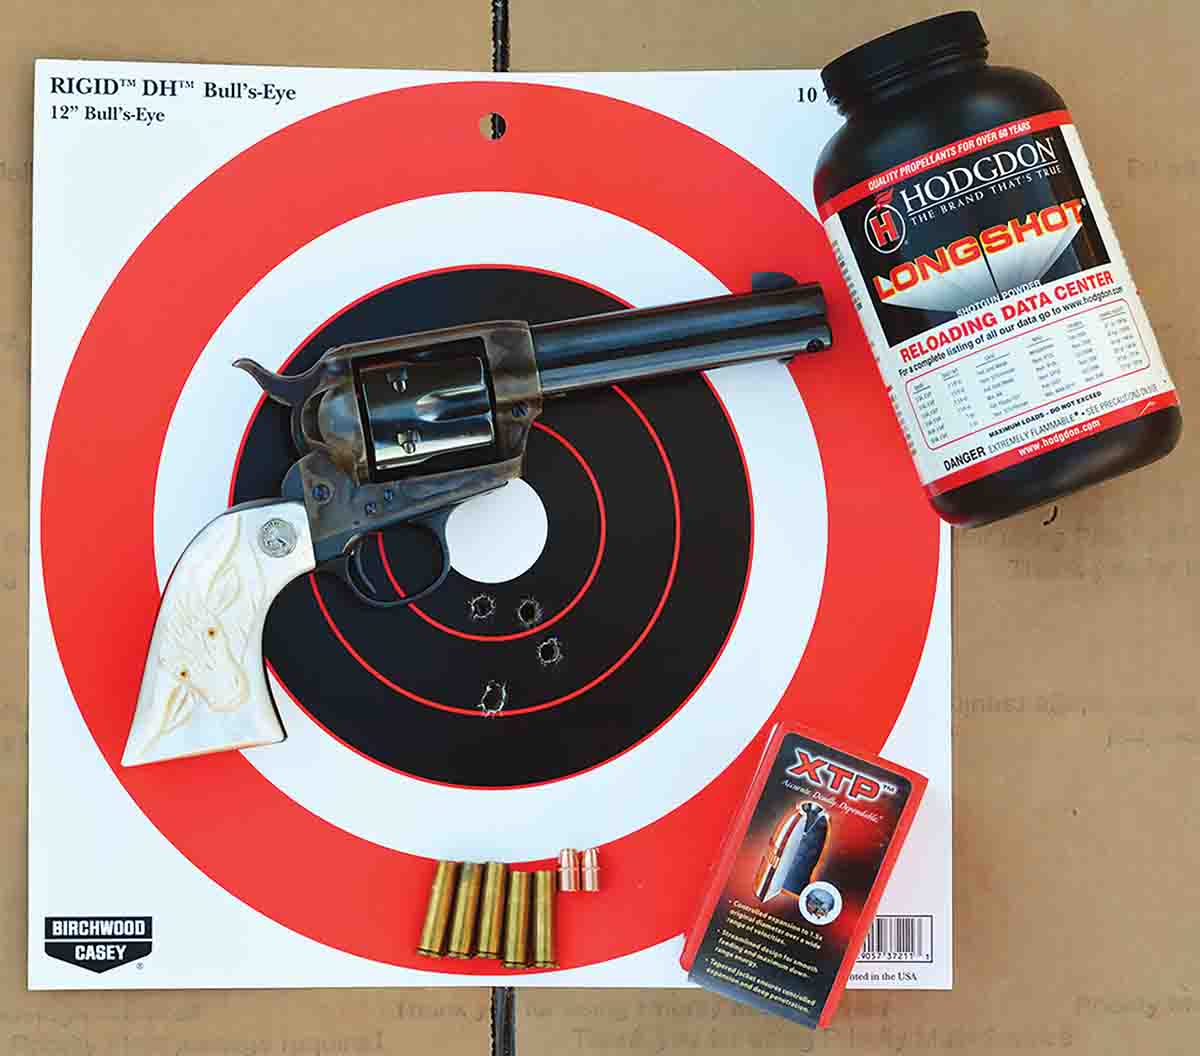 Properly handloaded, the .32-20 can offer top-notch accuracy with 25-yard groups often measuring around 1 inch, but select loads will produce even smaller groups.